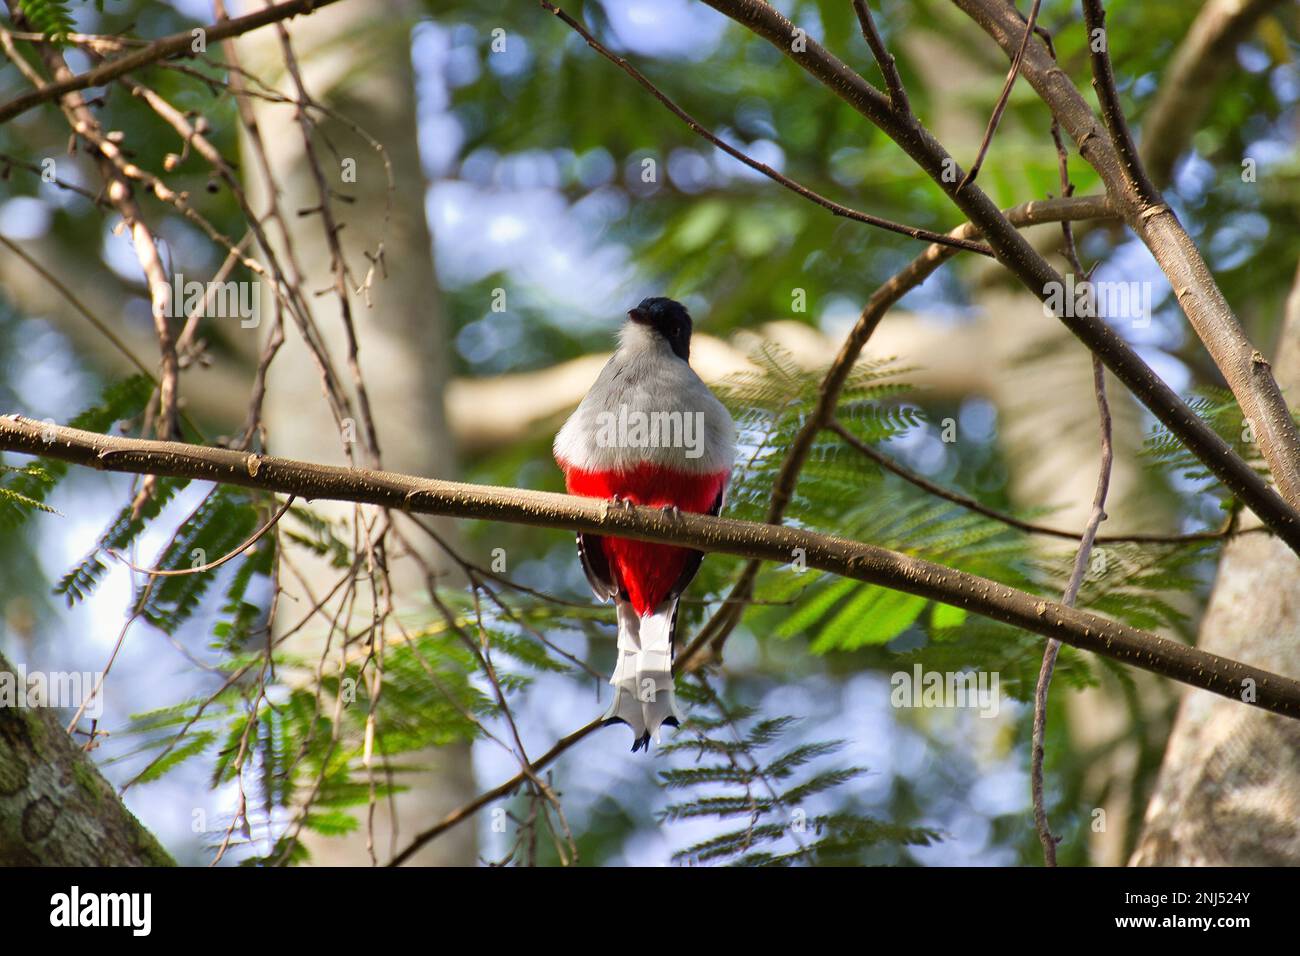 Full body shot of a cubatrogon sitting on a branch, trees and leaves in the background. Stock Photo